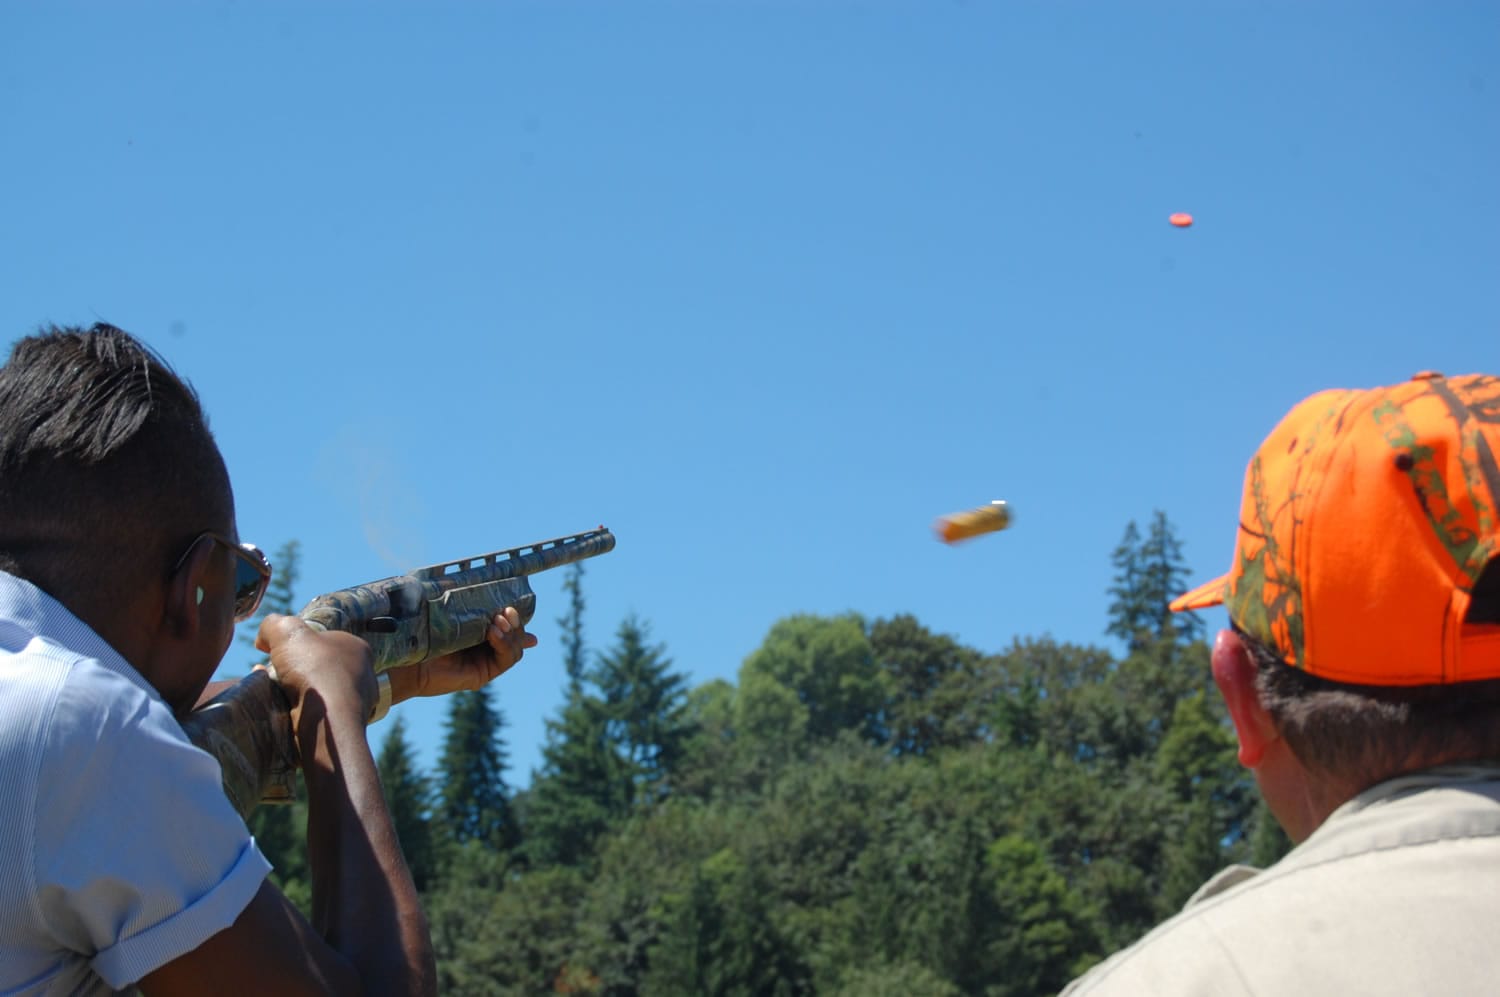 Chef Gregory Gourdet of Portland restaurant Departure fires a .20-gauge shotgun during firearms training June 29 near Canby, Ore.